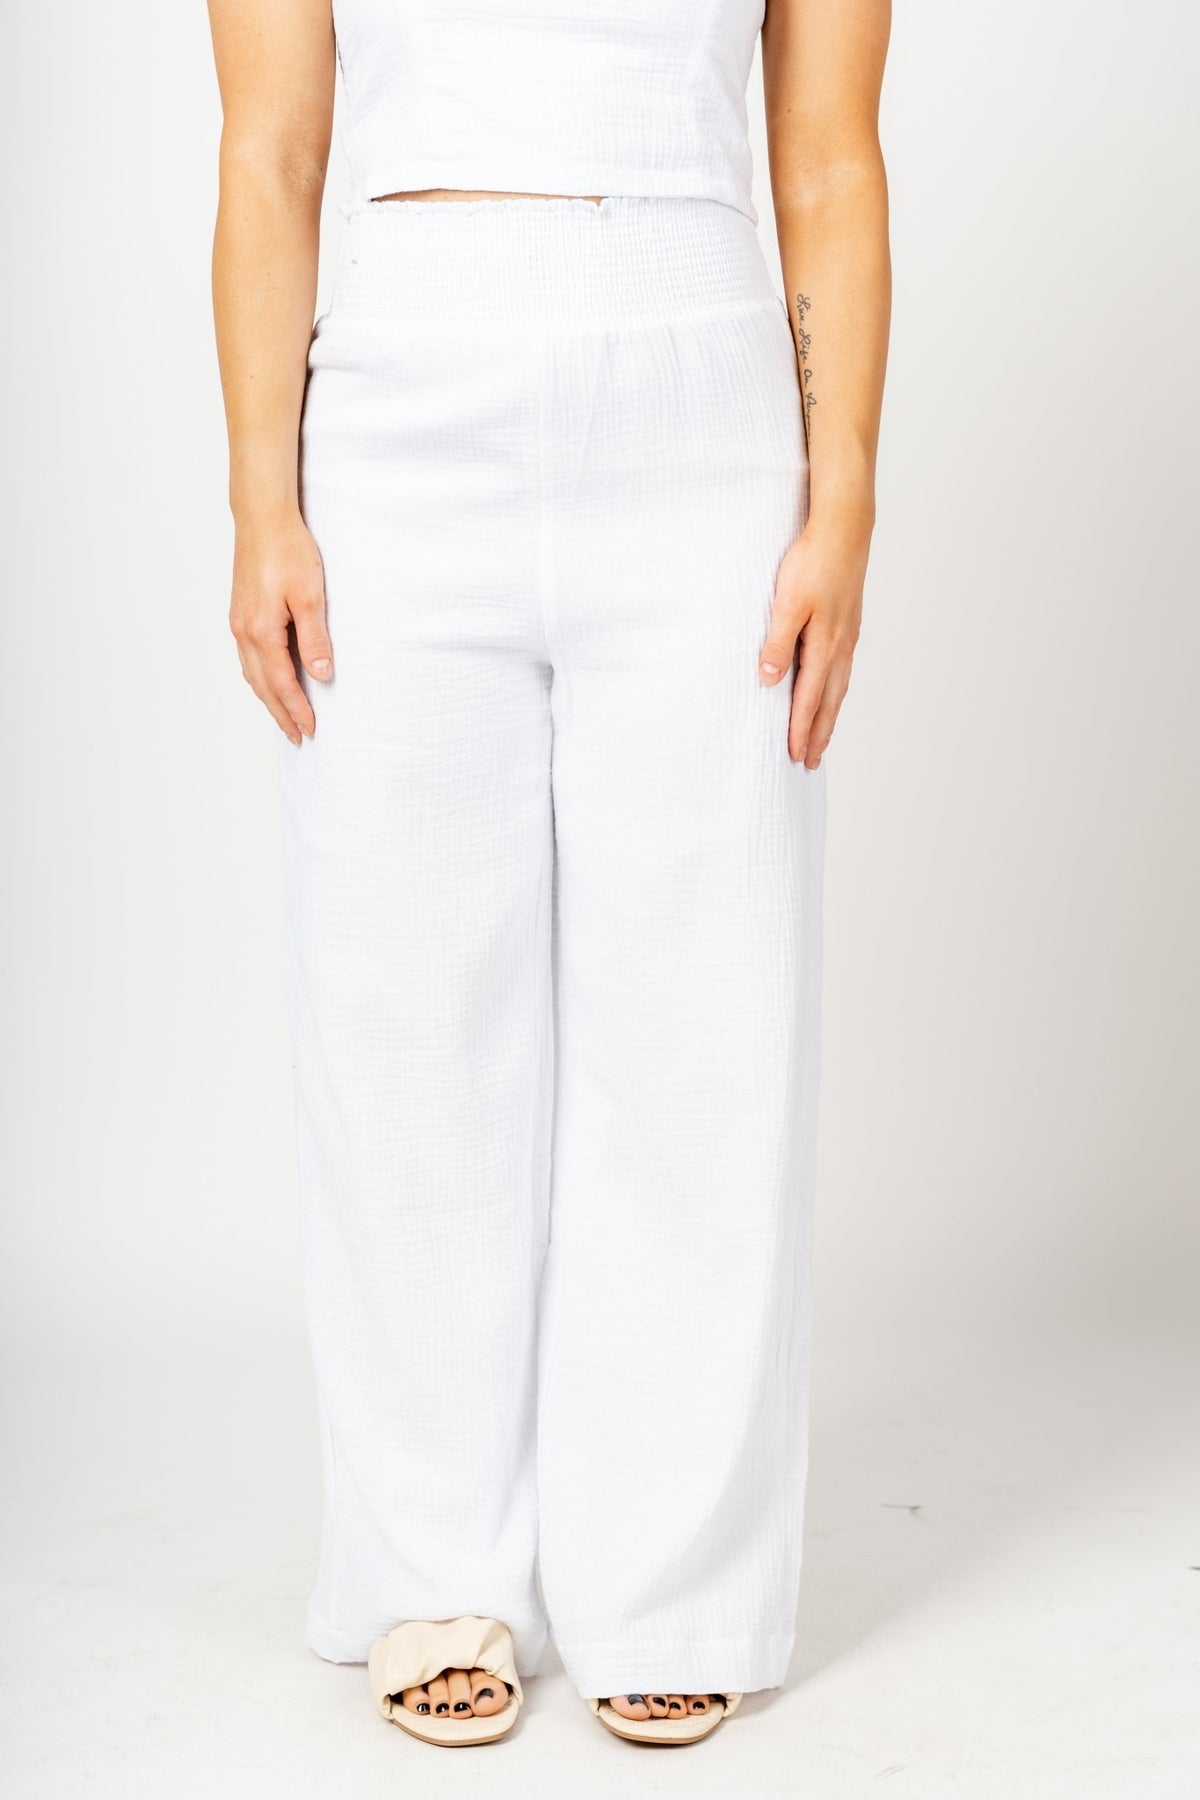 Z Supply Cassidy gauze pants white - Z Supply Pants - Z Supply Tops, Dresses, Tanks, Tees, Cardigans, Joggers and Loungewear at Lush Fashion Lounge